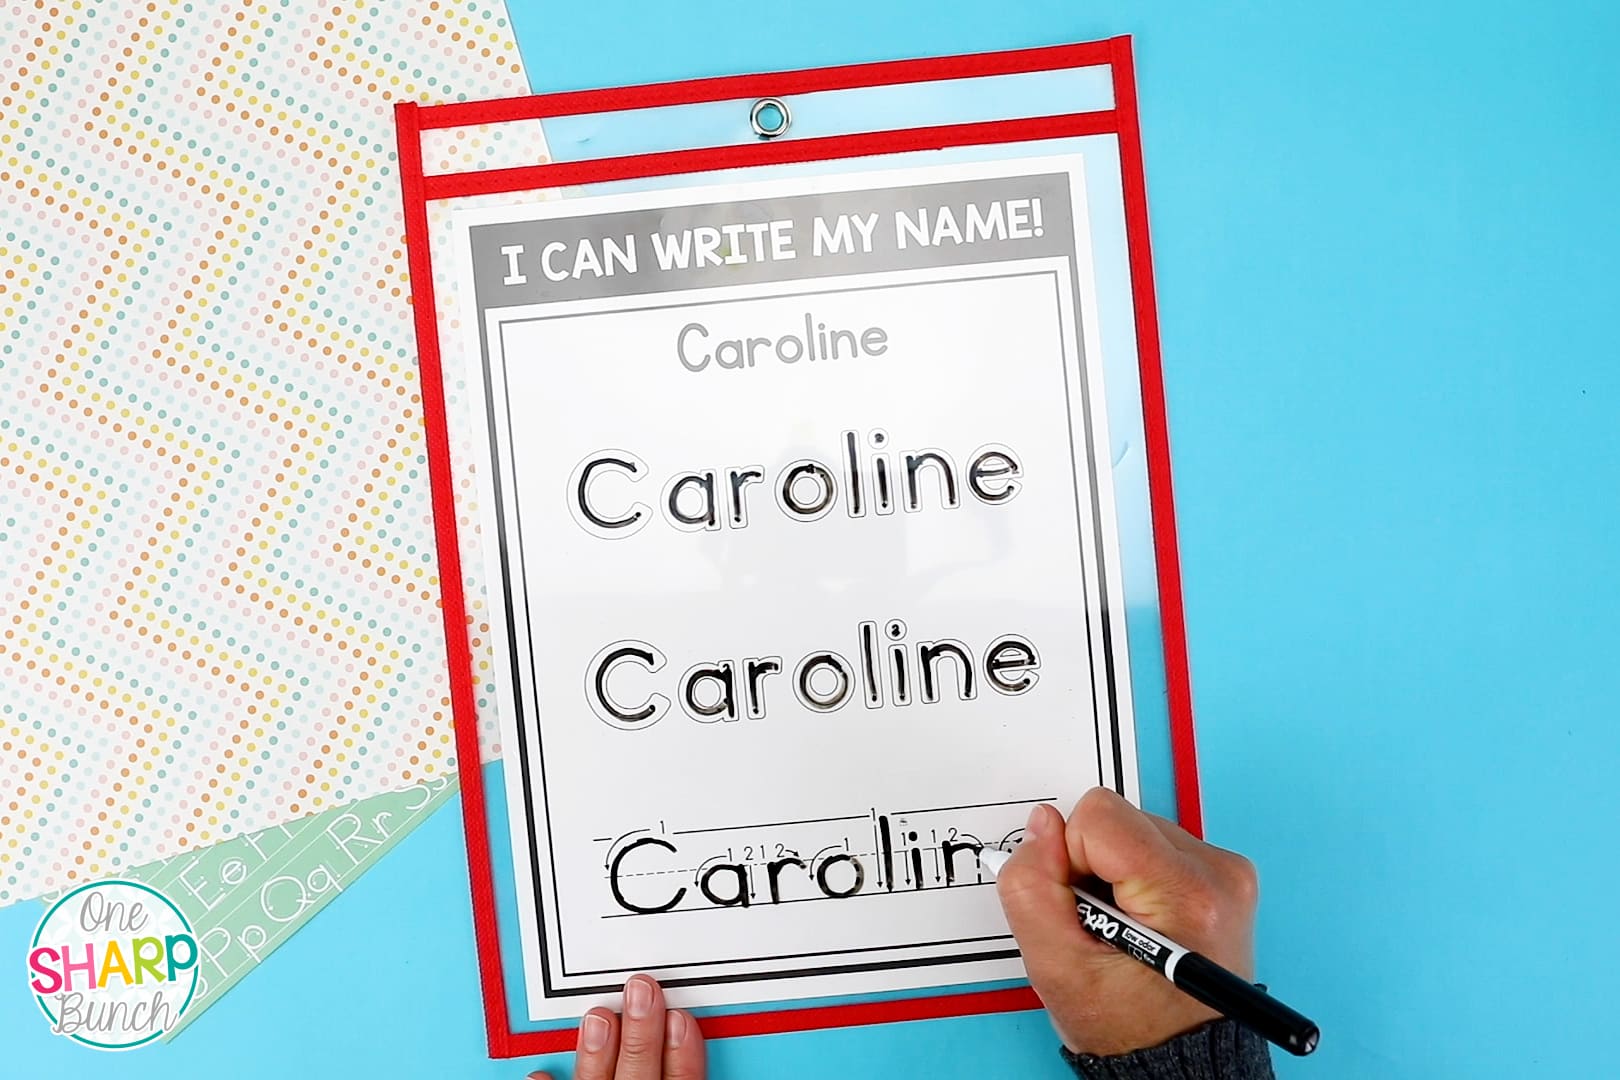 Looking for some fun and engaging name writing activities for preschool and kindergarten? These back to school name writing practice mats and name building activities are perfect for helping students learn how to write their name. Early elementary students get to practice tracing their name and building their name with magnetic letters. These editable name mats work well for centers, morning work or early finisher activities. Use these name practice mats with your favorite name books for kids!